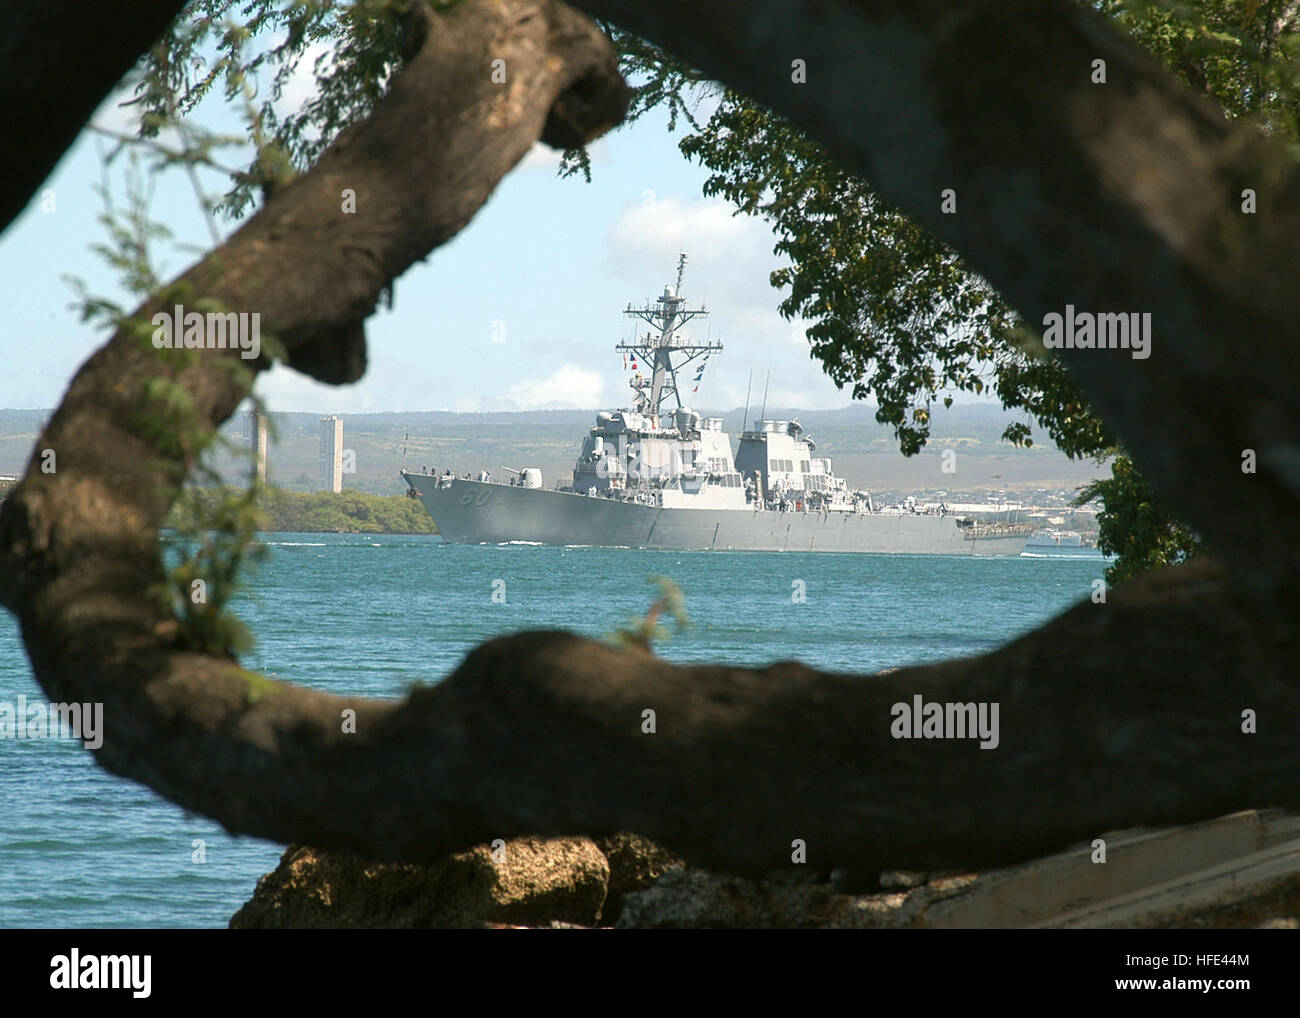 0500509-N-6775N-004  Pearl Harbor, Hawaii (May 9, 2005) - The guided missile destroyer USS Paul Hamilton (DDG 60) passes Hospital Point at Pearl Harbor, as the ship depart on a scheduled deployment with the Nimitz Carrier Strike Group in support of the global war on terrorism. U.S. Navy photo by Photographer’s Mate 2nd Class Justin P. Nesbitt (RELEASED) US Navy 050509-N-6775N-004 The guided missile destroyer USS Paul Hamilton (DDG 60) passes Hospital Point at Pearl Harbor Stock Photo